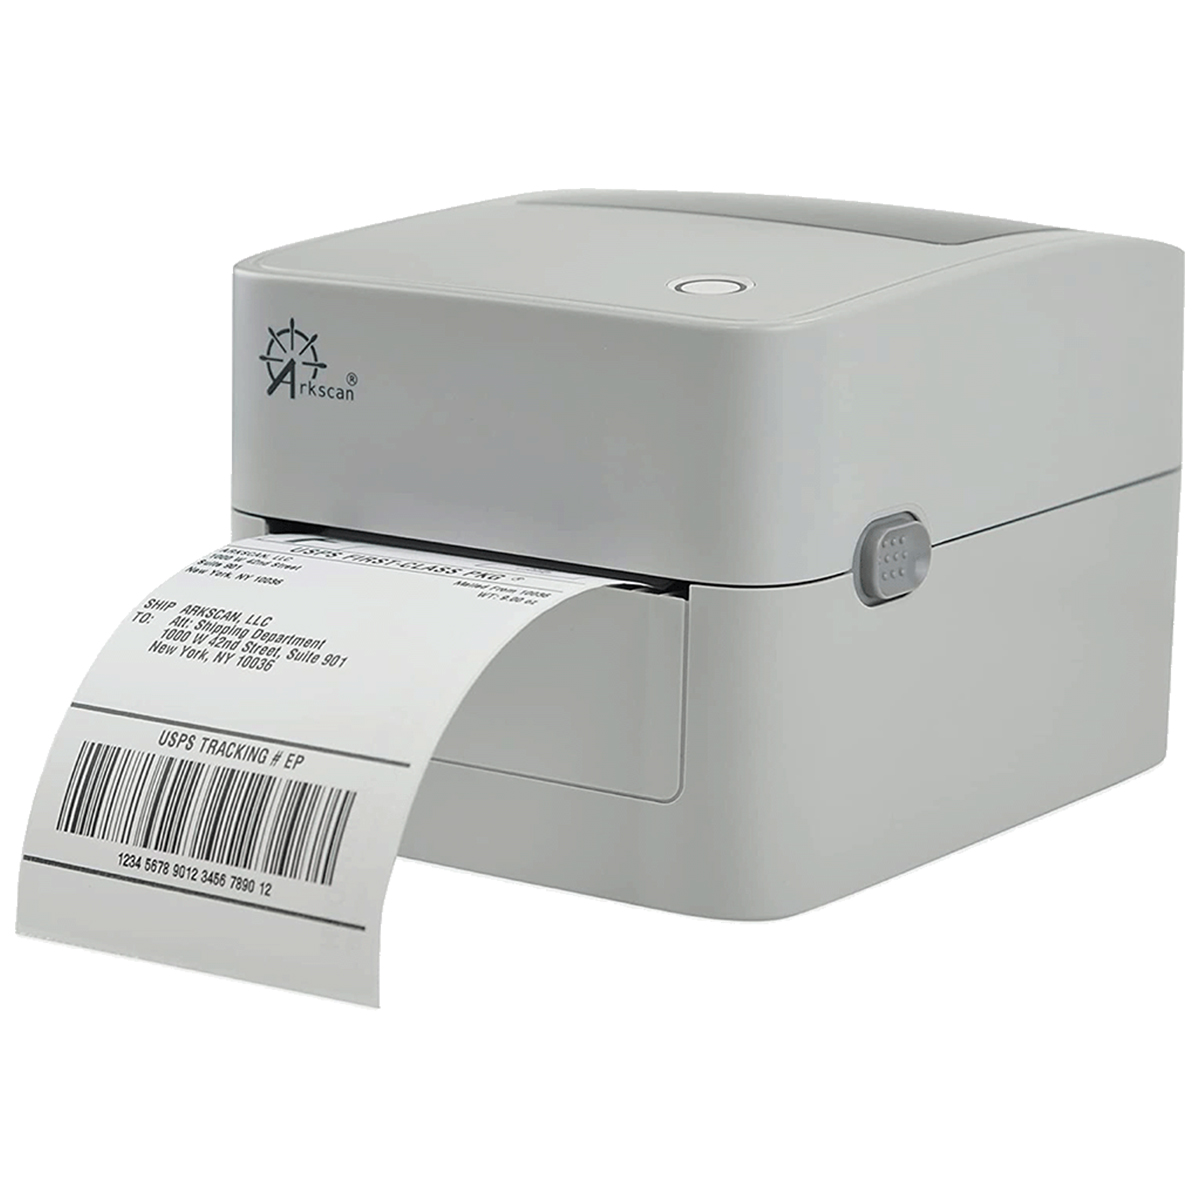 Arkscan SL450 4x6 Shipping Label in 1 Roll 450 Pages per roll Direct Thermal for Arkscan 2054A Zebra LP2844 Zp-450 Zp-500 Zp-505 & Zebra Compatible Printers White 